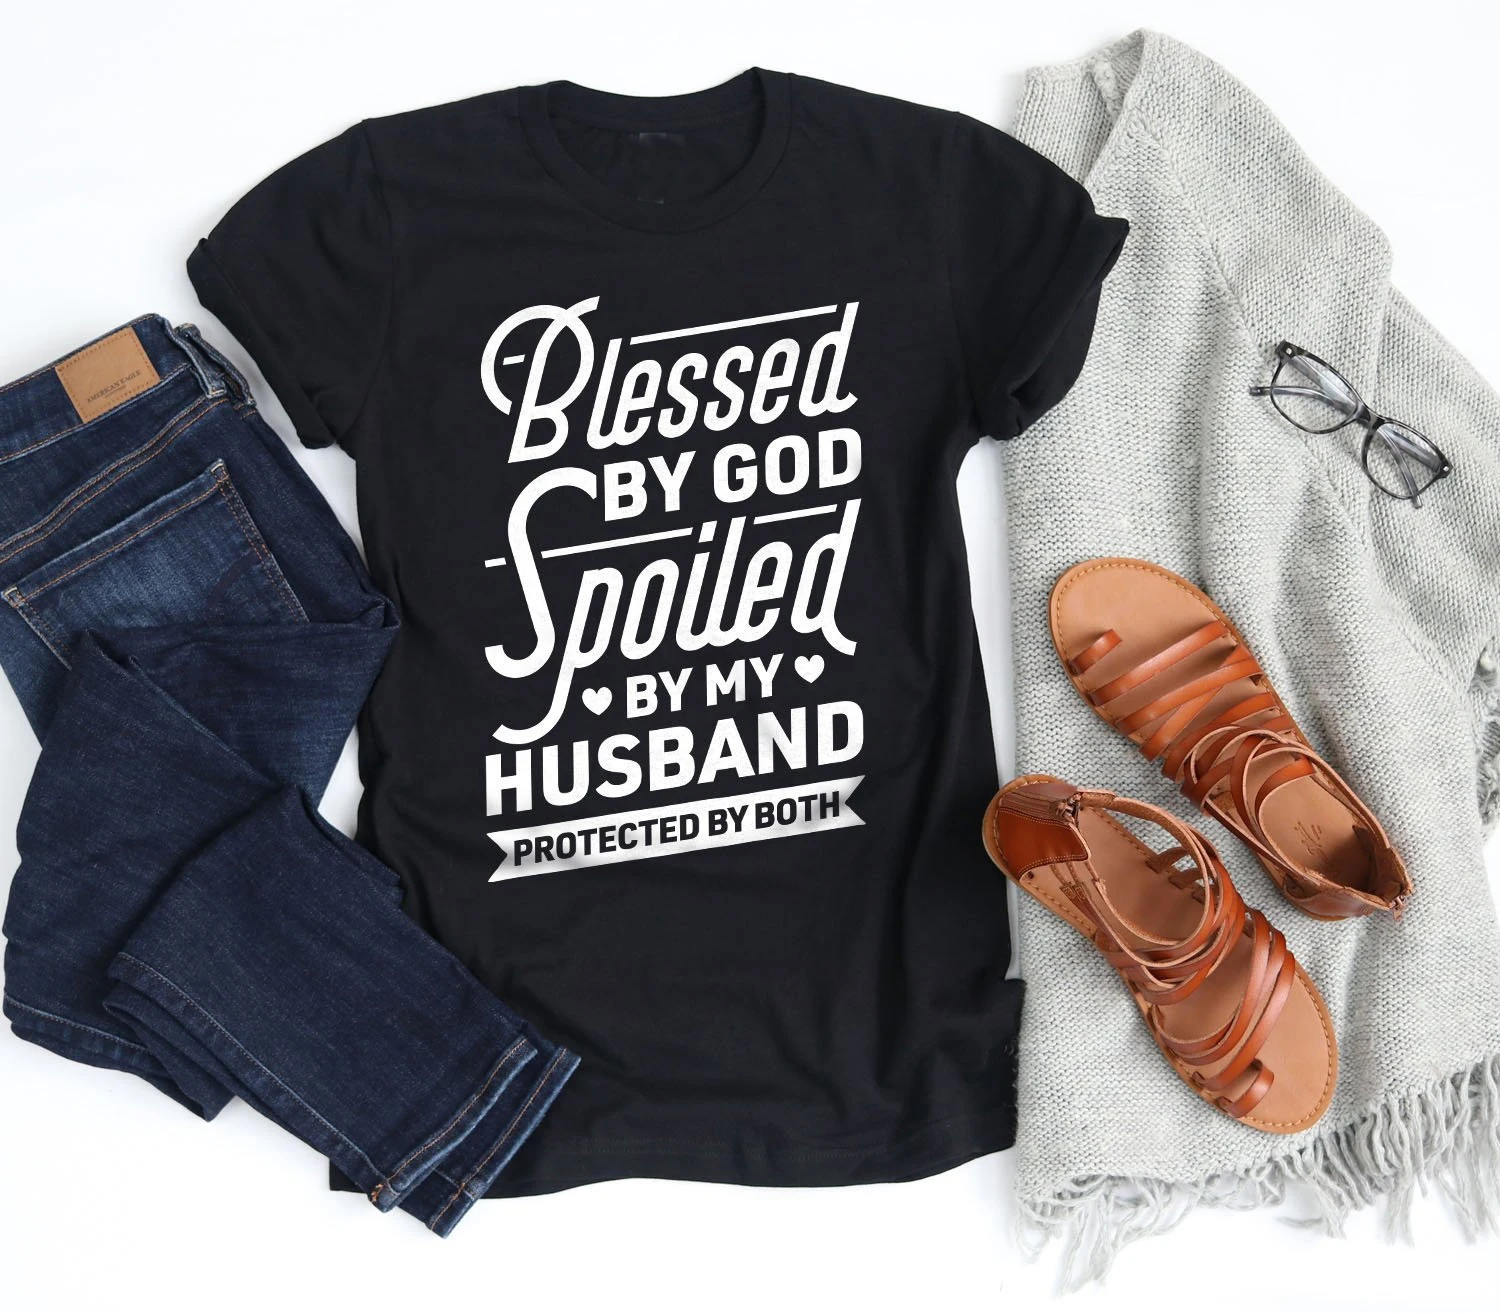 

Blessed By God Christian t Shirt women fashion grunge tumblr funny hipster slogan graphic vintage street style tees quote tops